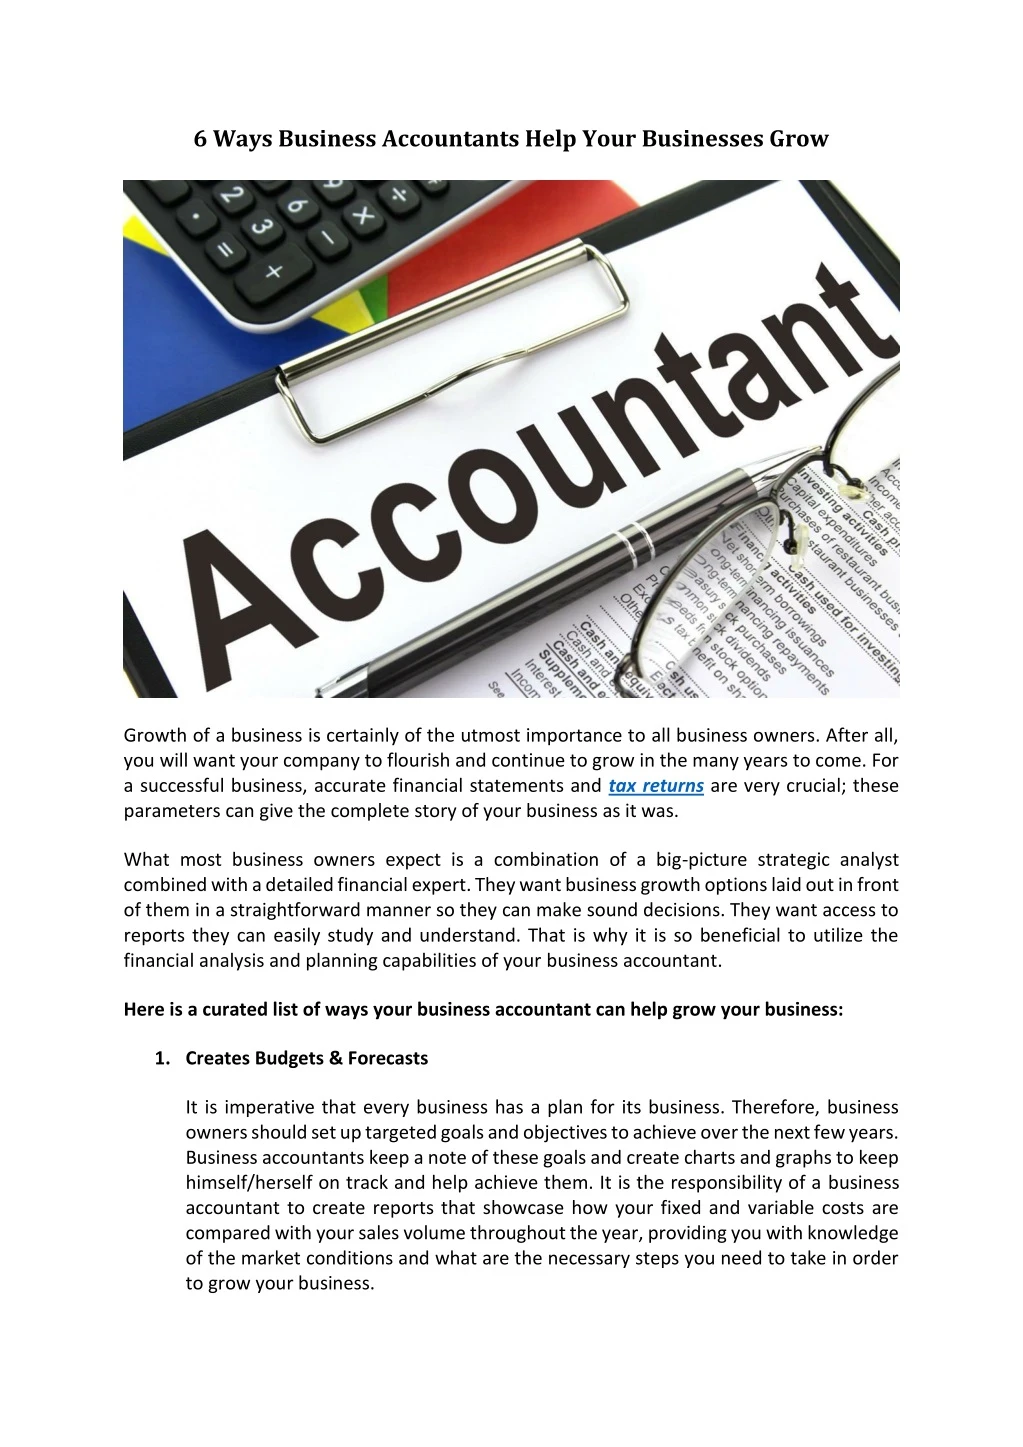 6 ways business accountants help your businesses